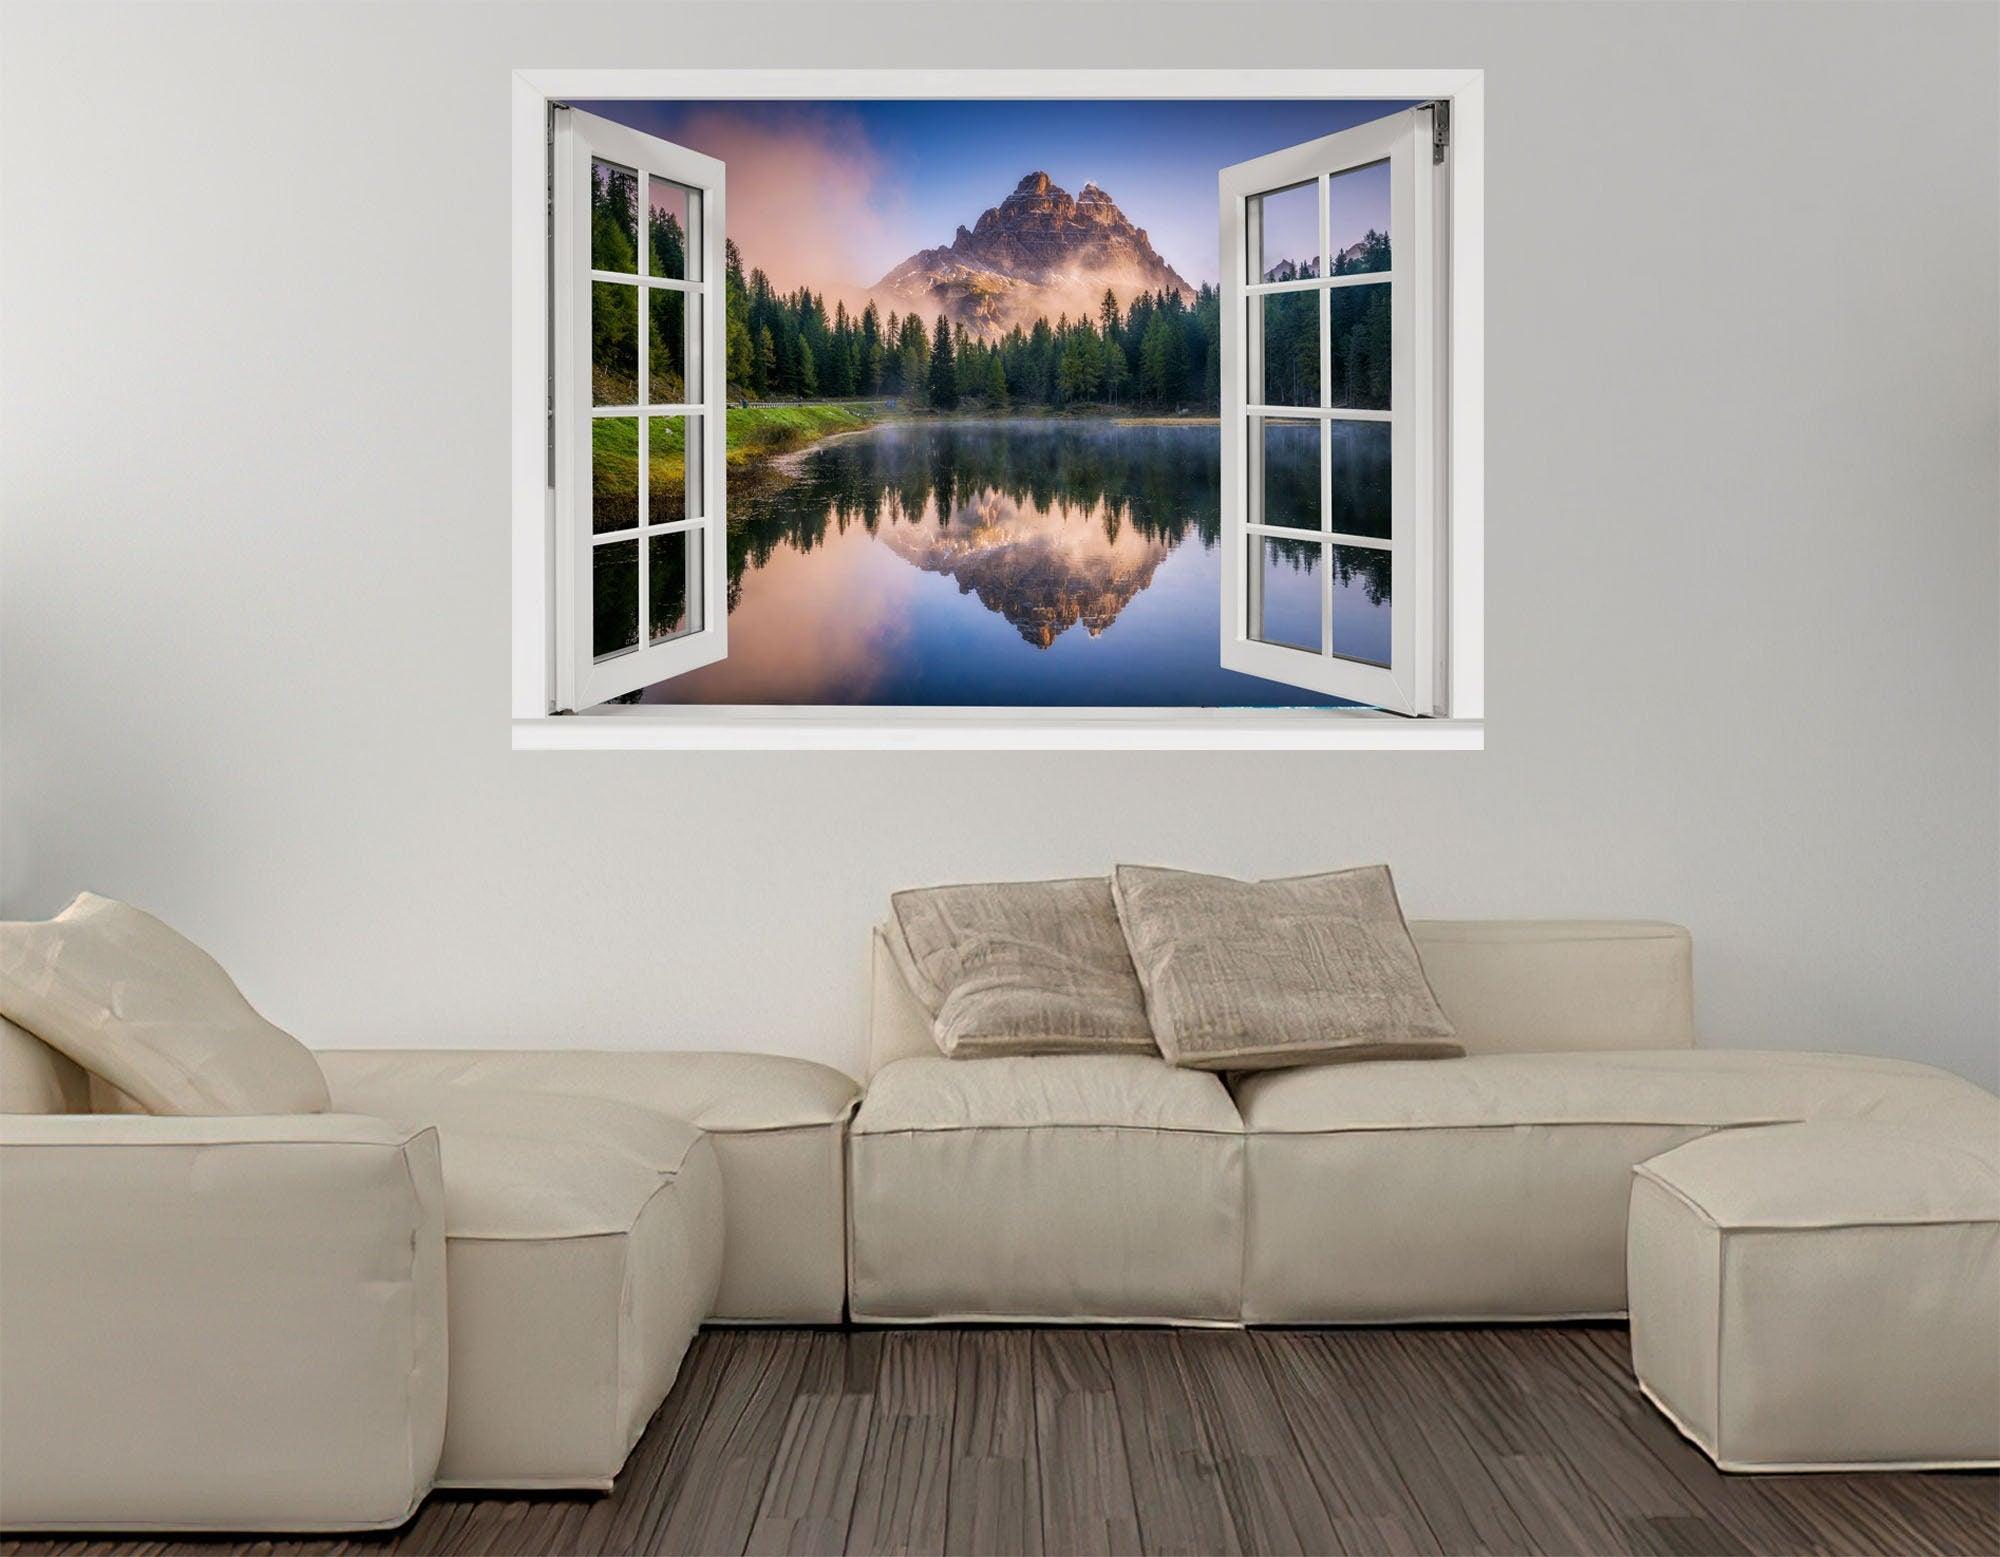 Window Scape Mountain #5 Window Decal Sticker Mural Lake Removable Fabric Window Frame Office Bedroom 3D